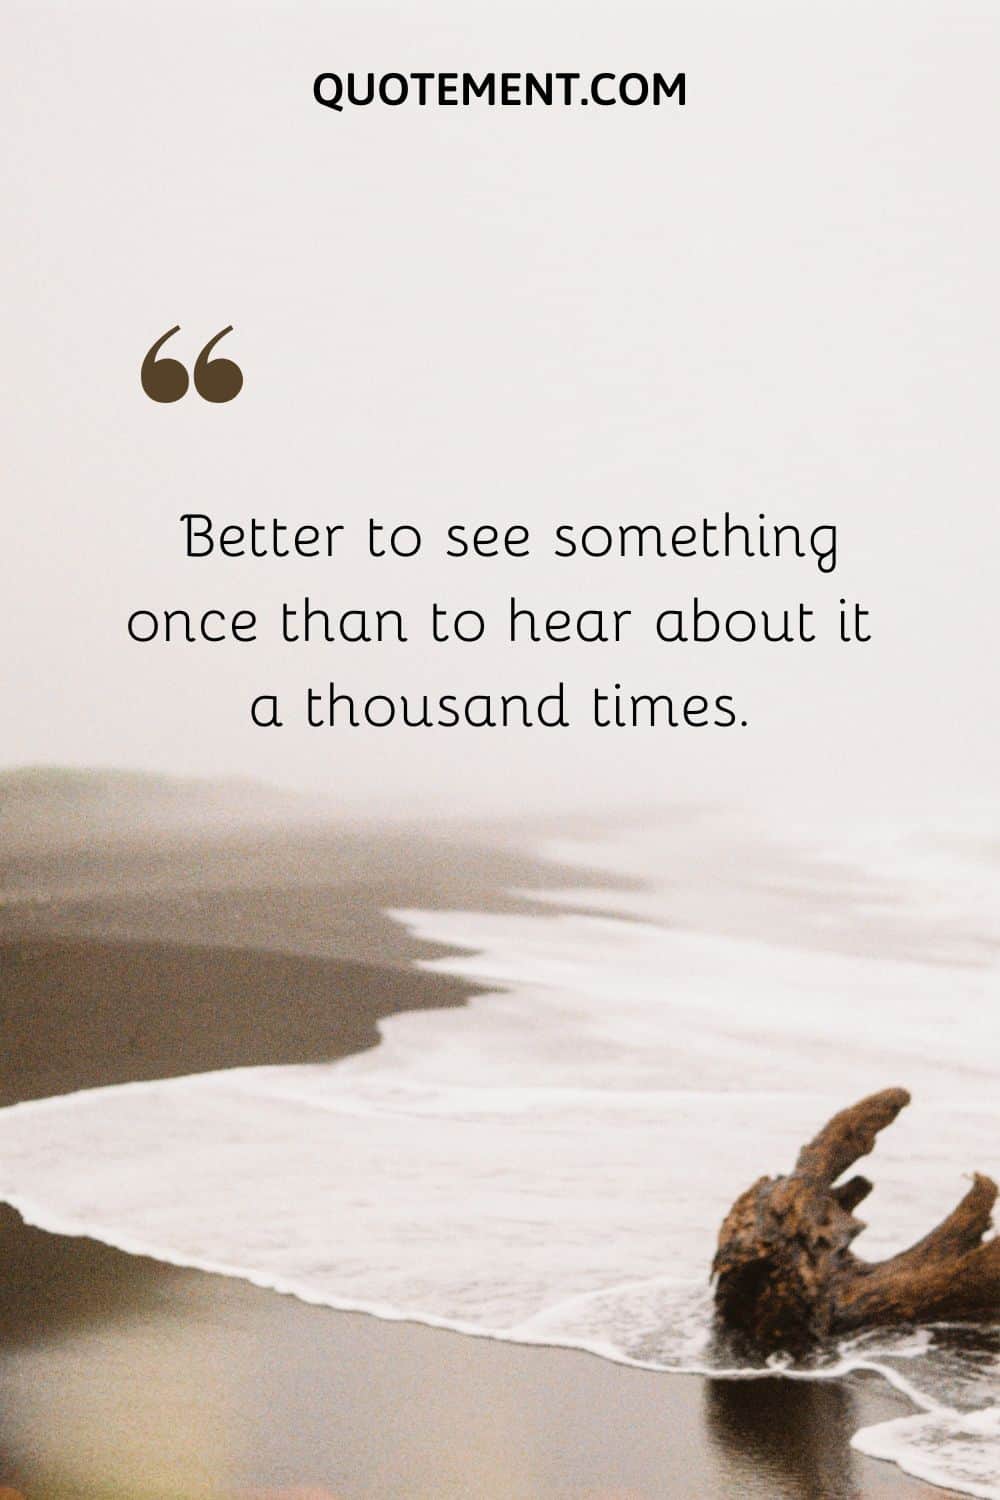 Better to see something once than to hear about it a thousand times.